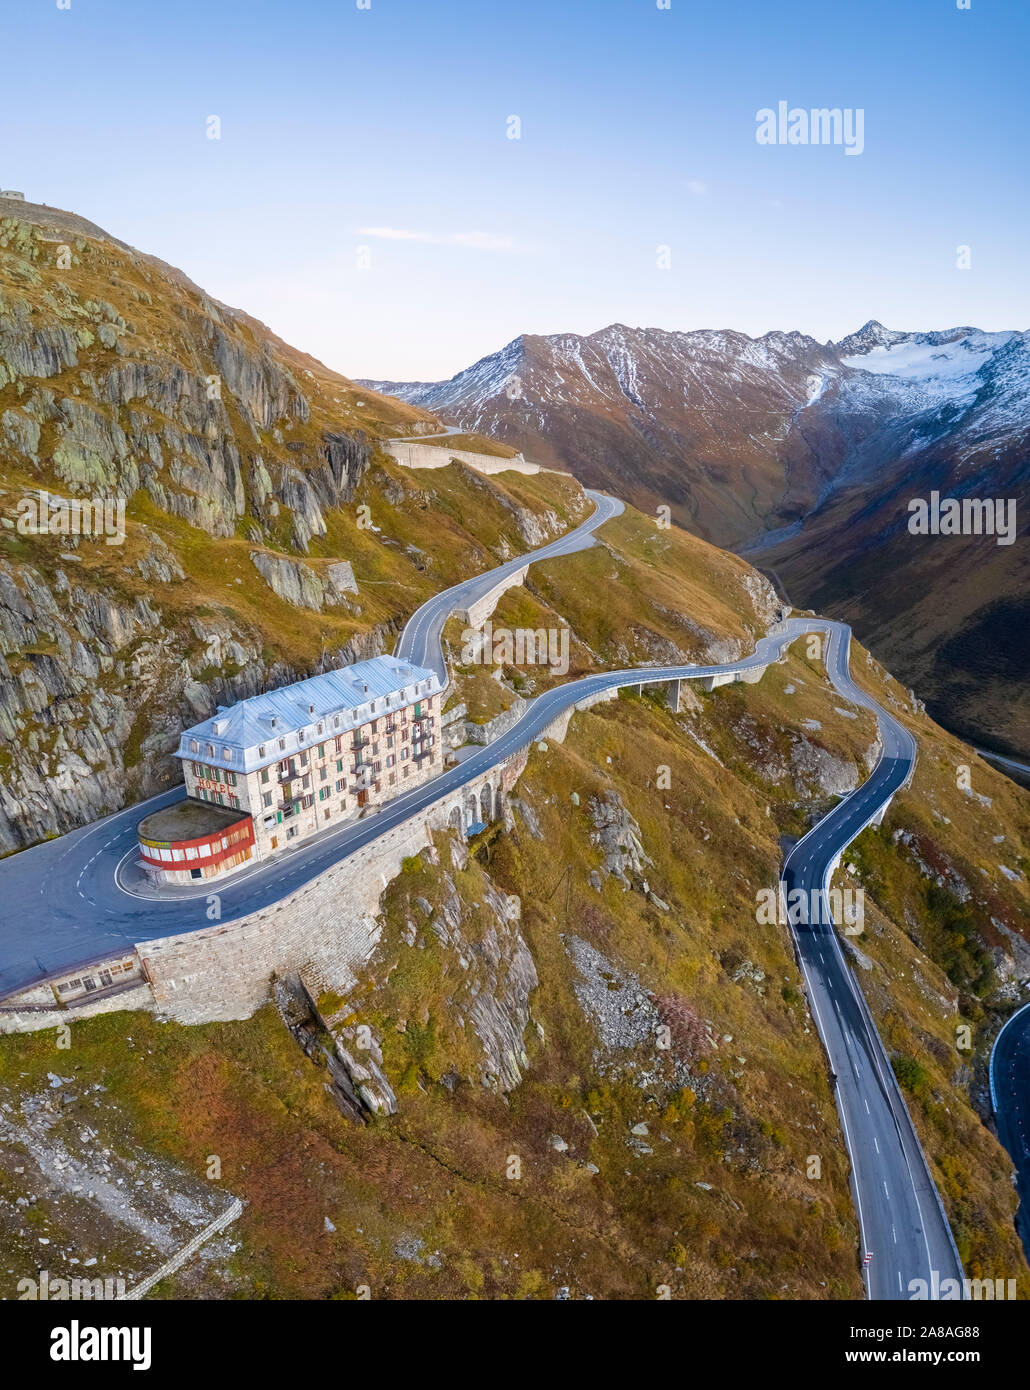 Aerial view of the Belvedere Hotel and the Furka Pass road, Obergoms, Canton of Valais, Swiss Alps, Switzerland. Stock Photo